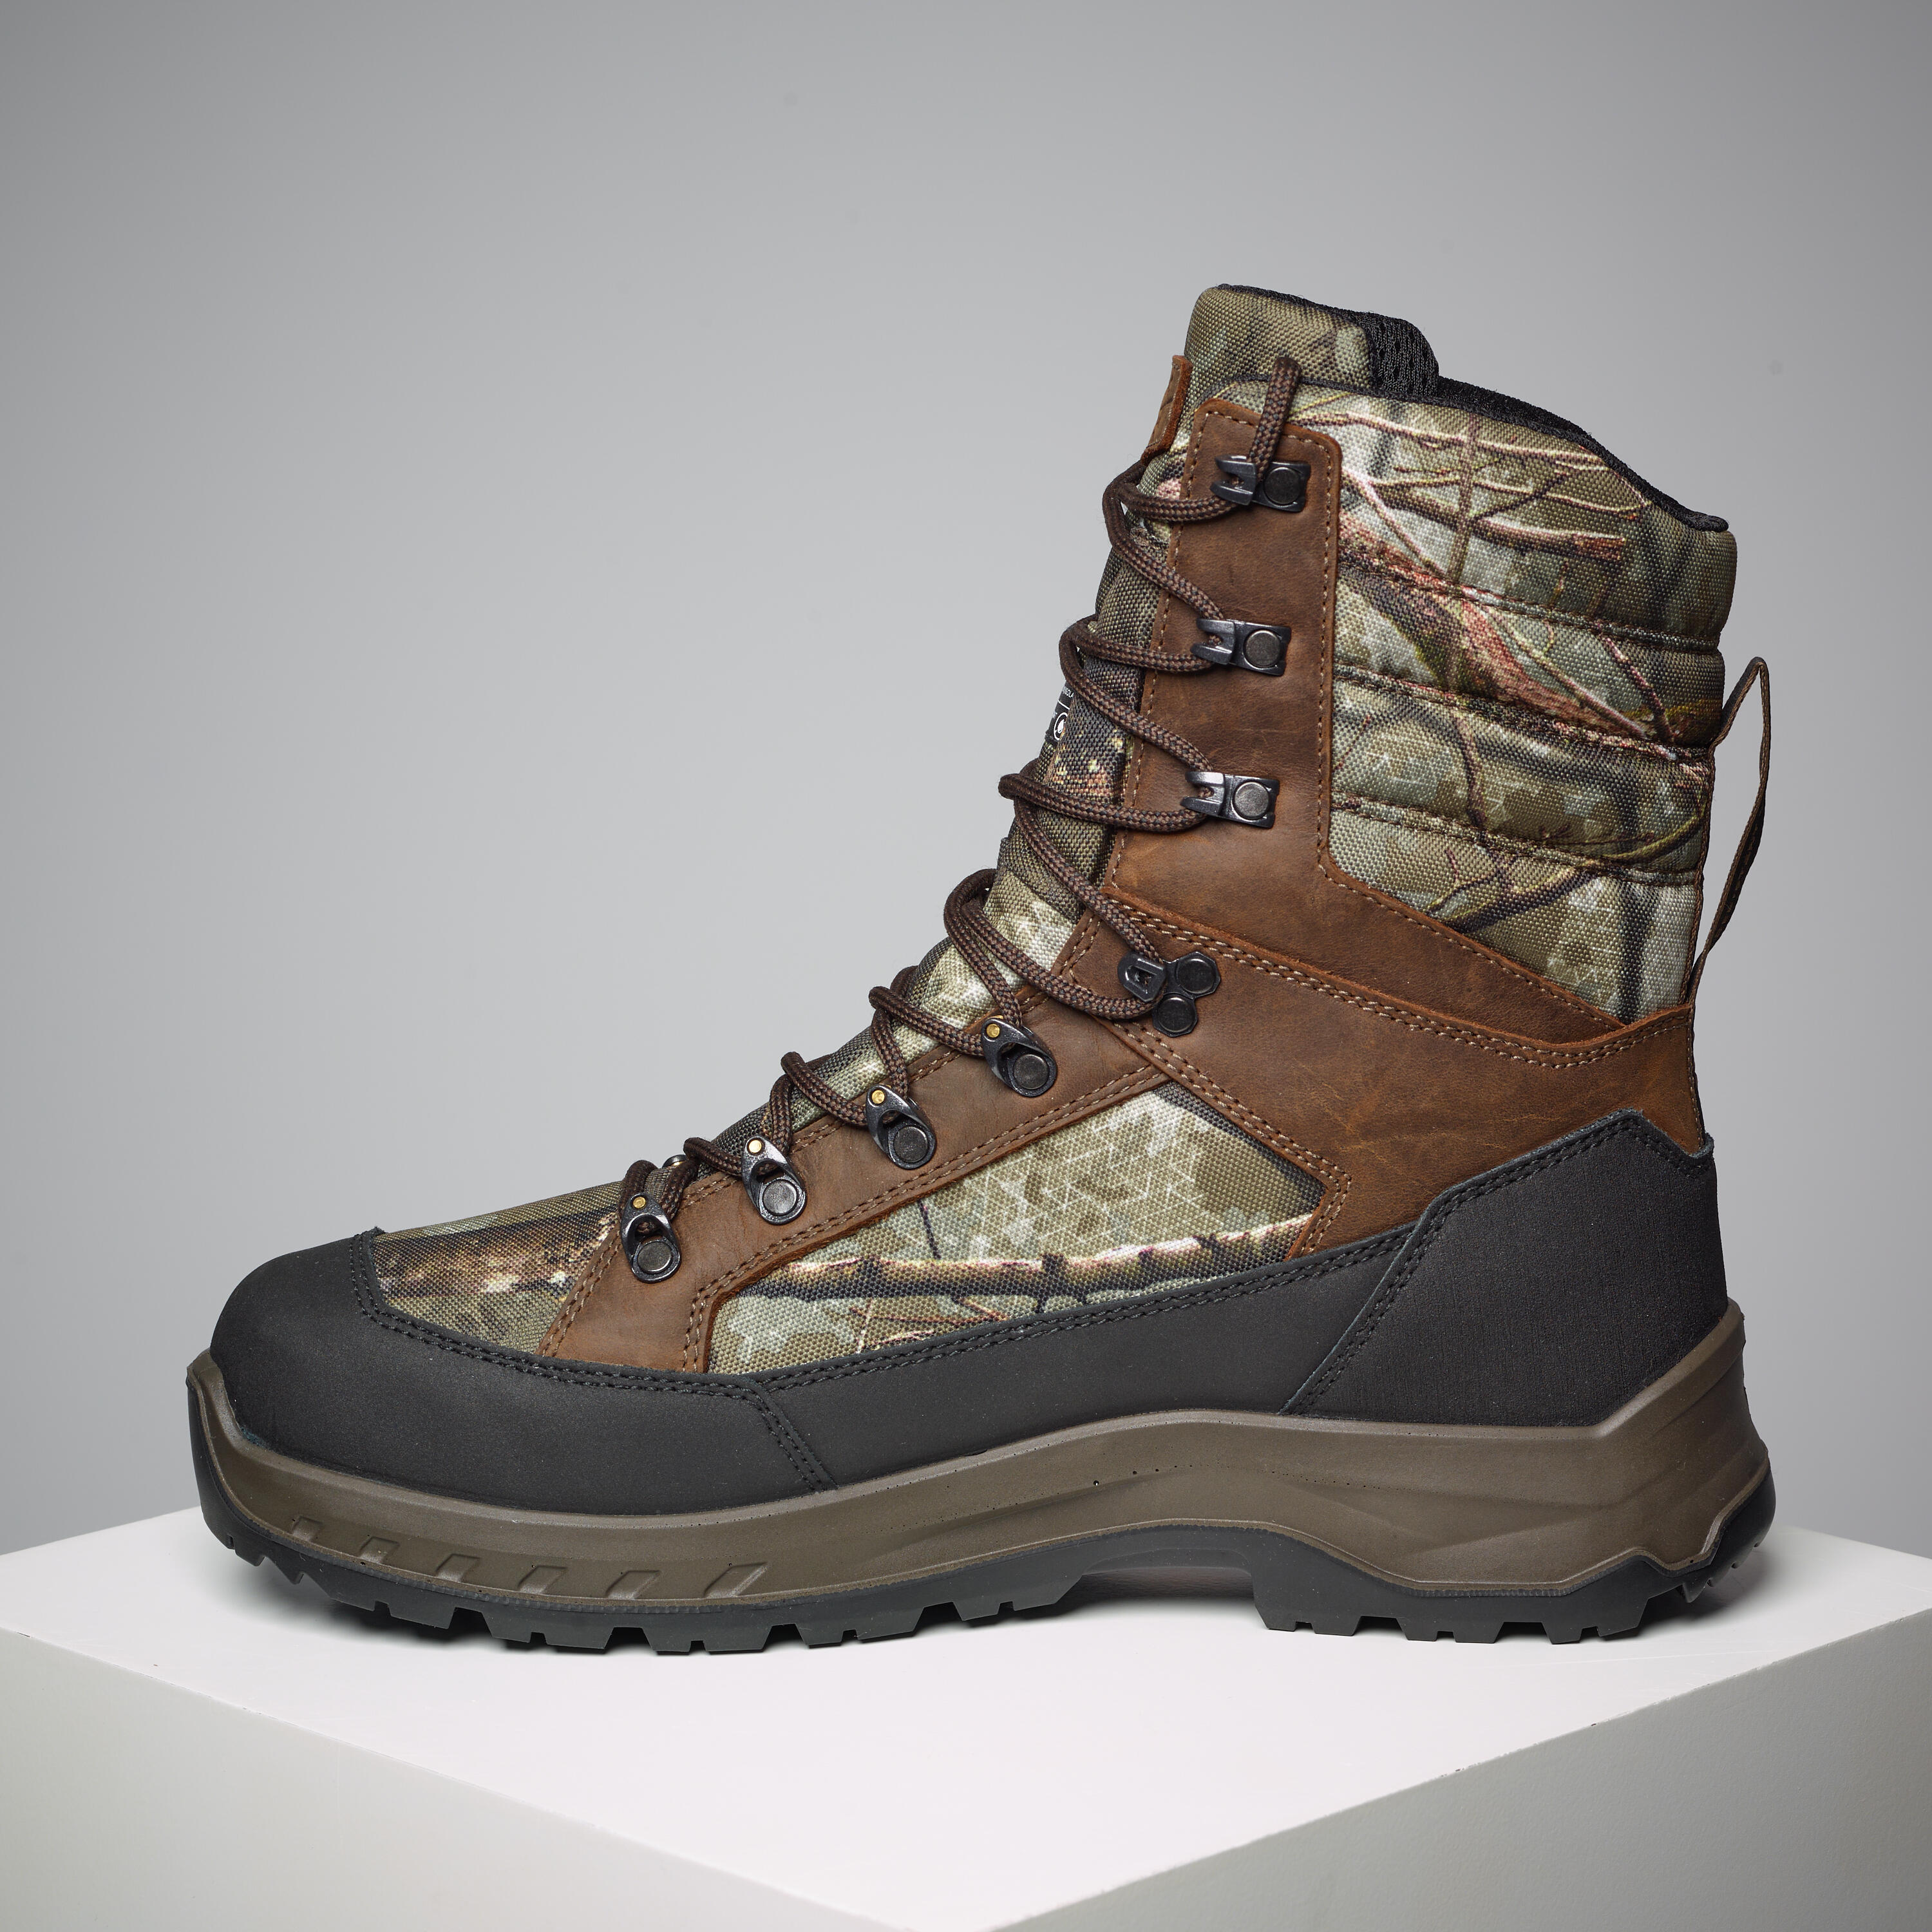 HUNTING BOOTS WARM WATERPROOF CAMOUFLAGE CROSSHUNT 540 2/5